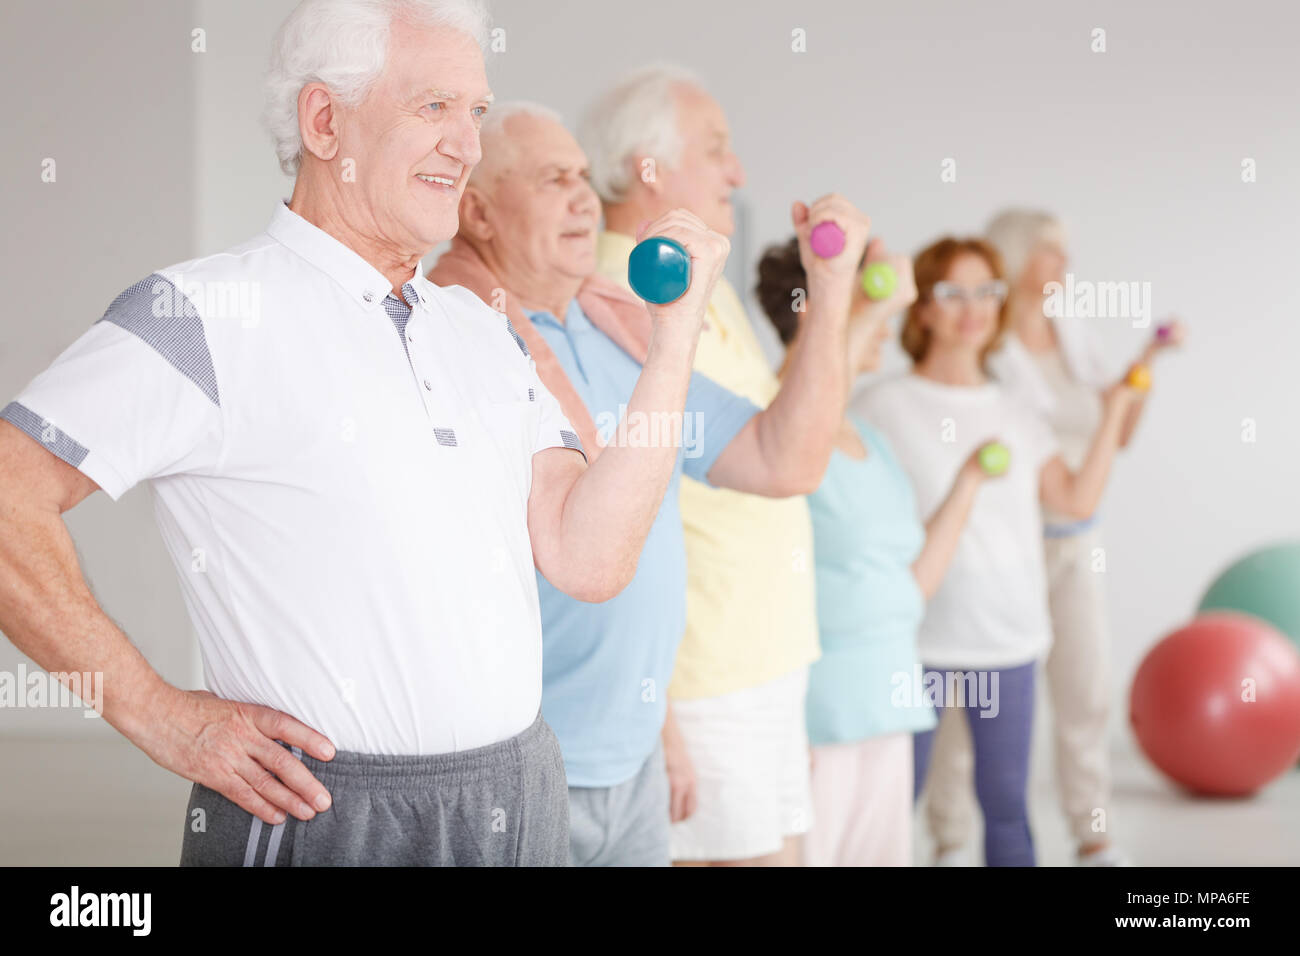 Group of active seniors using dumbbells during sport classes Stock Photo